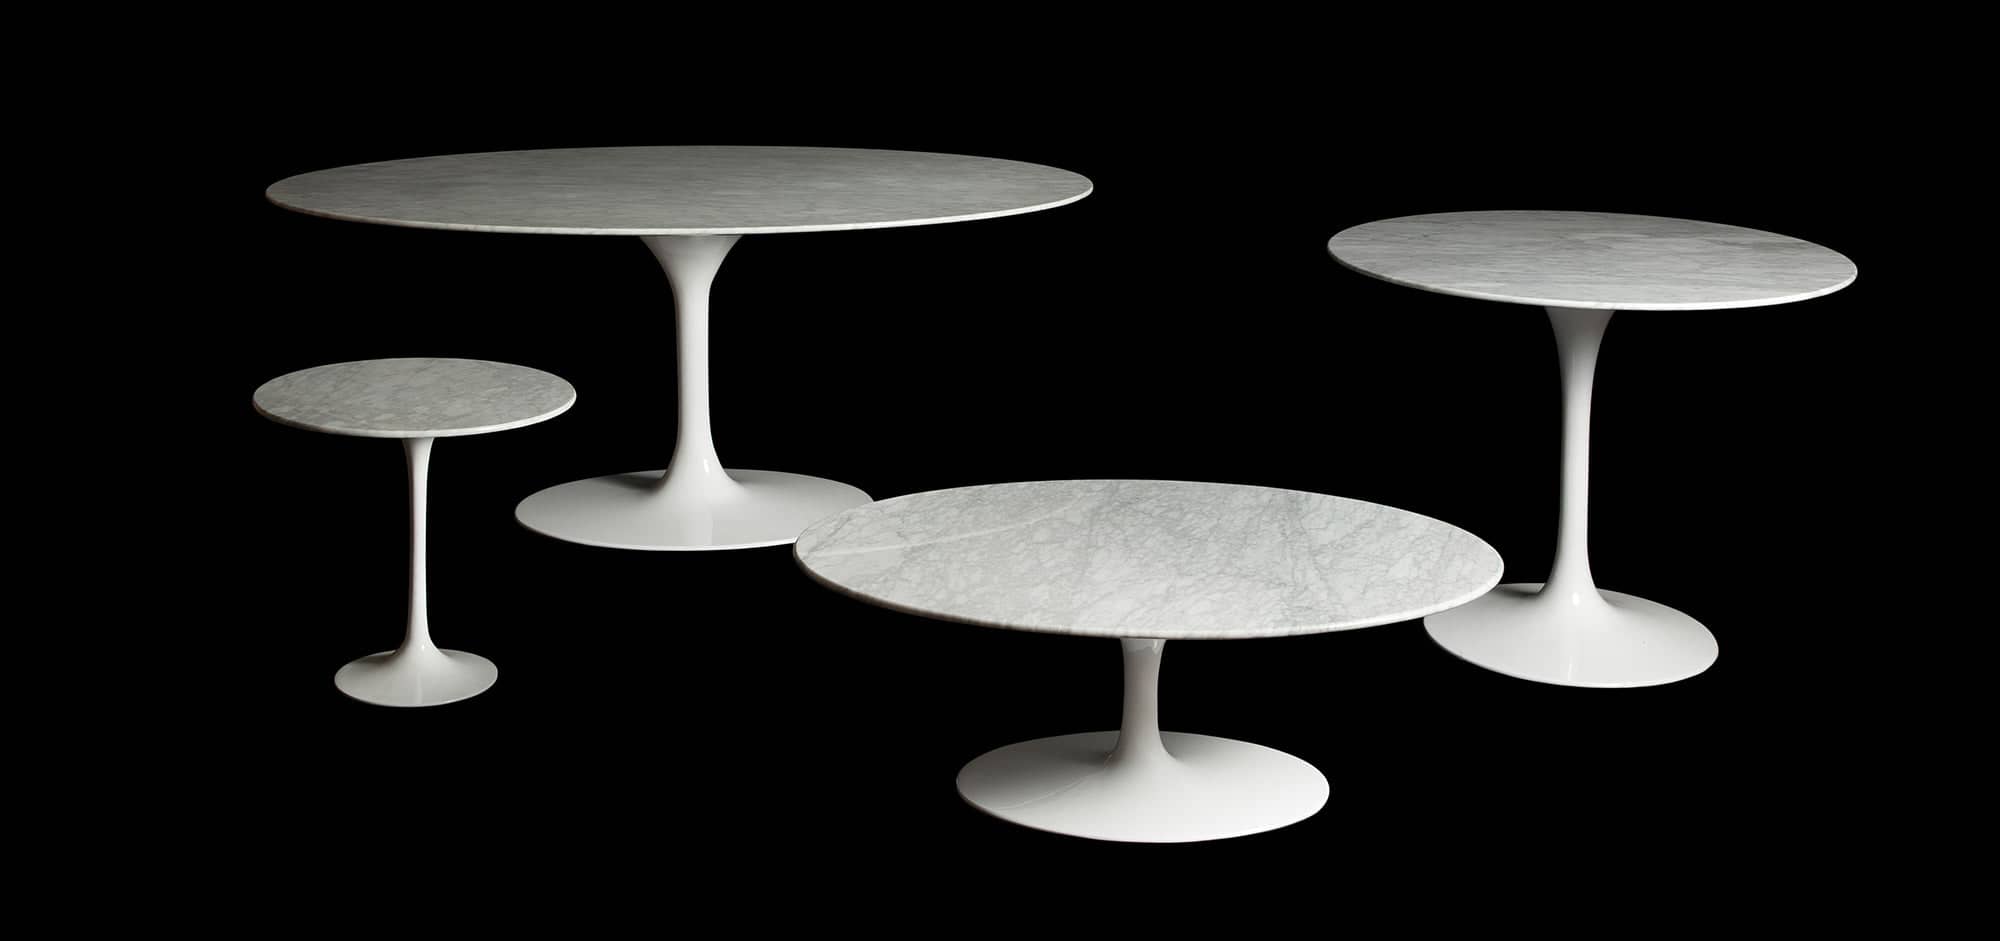 A selection of both oval and circular Saarinen Tulip Side and Coffee Tables made with solid Italian Carrara Marble